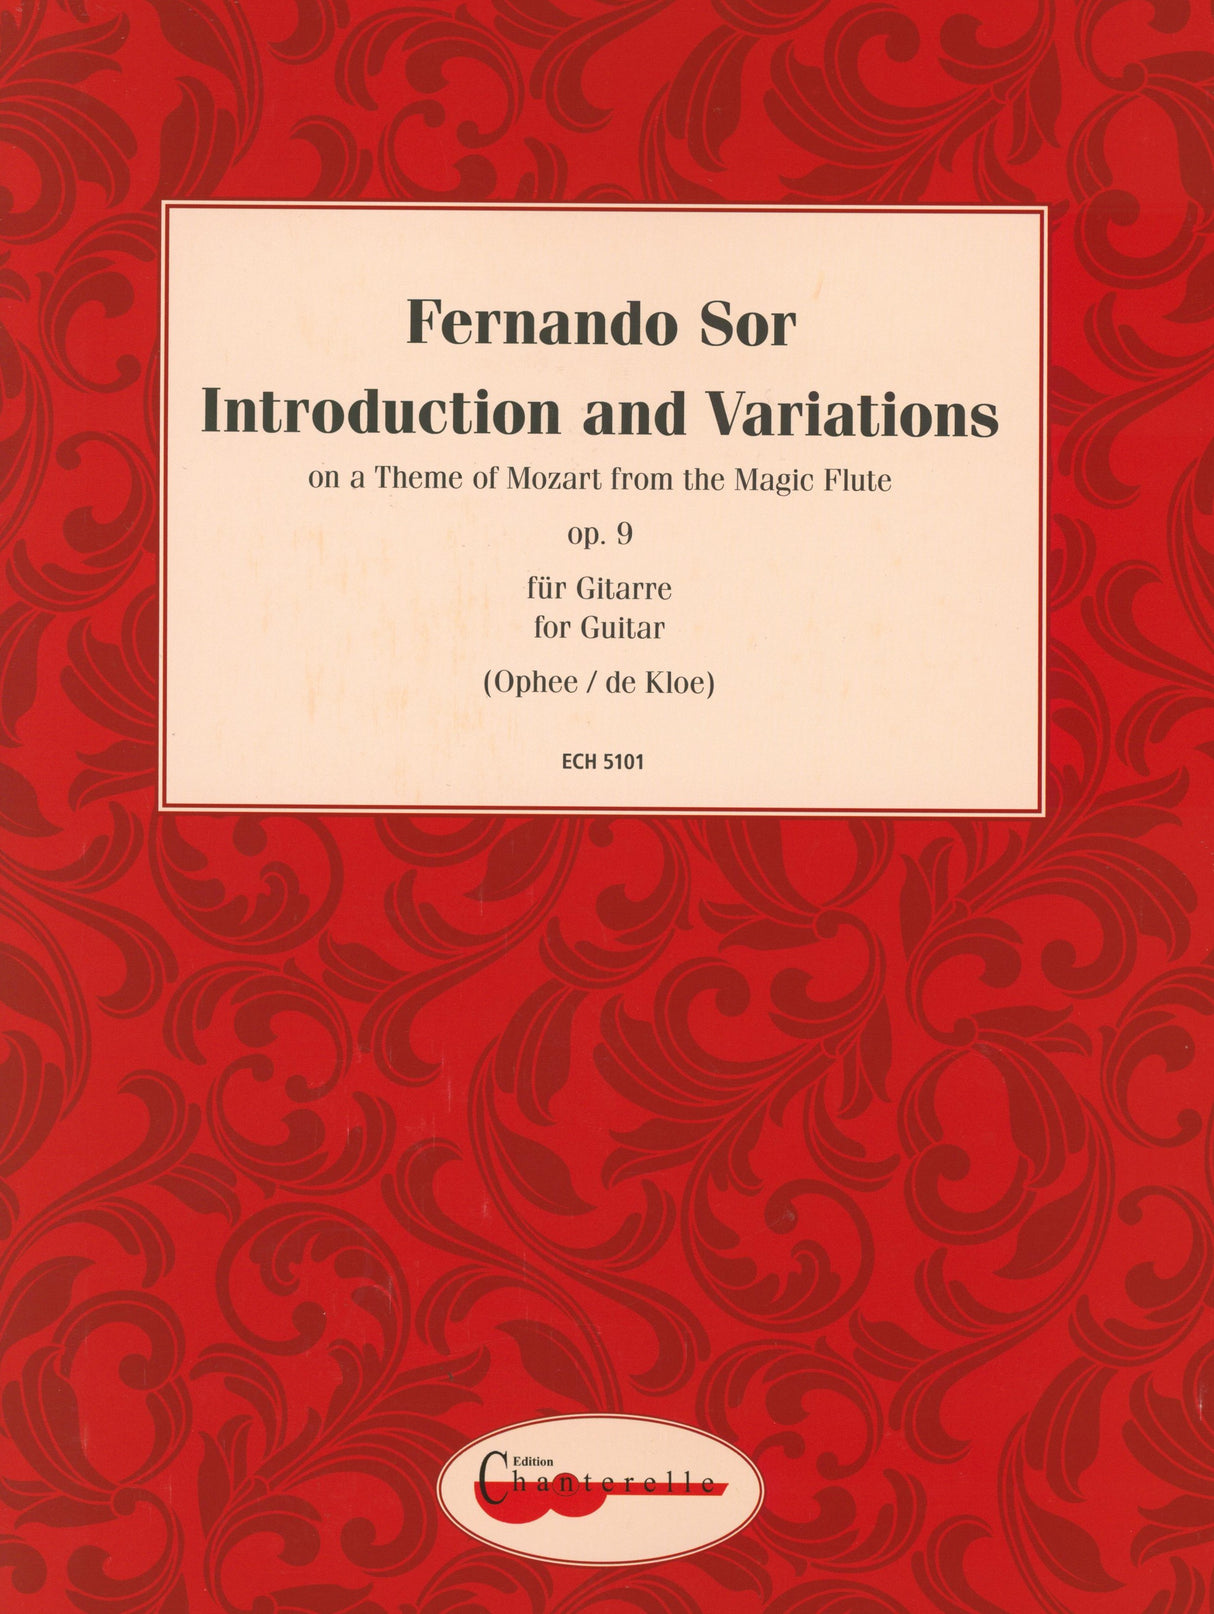 Sor: Introduction and Variations on a Theme by Mozart, Op. 9